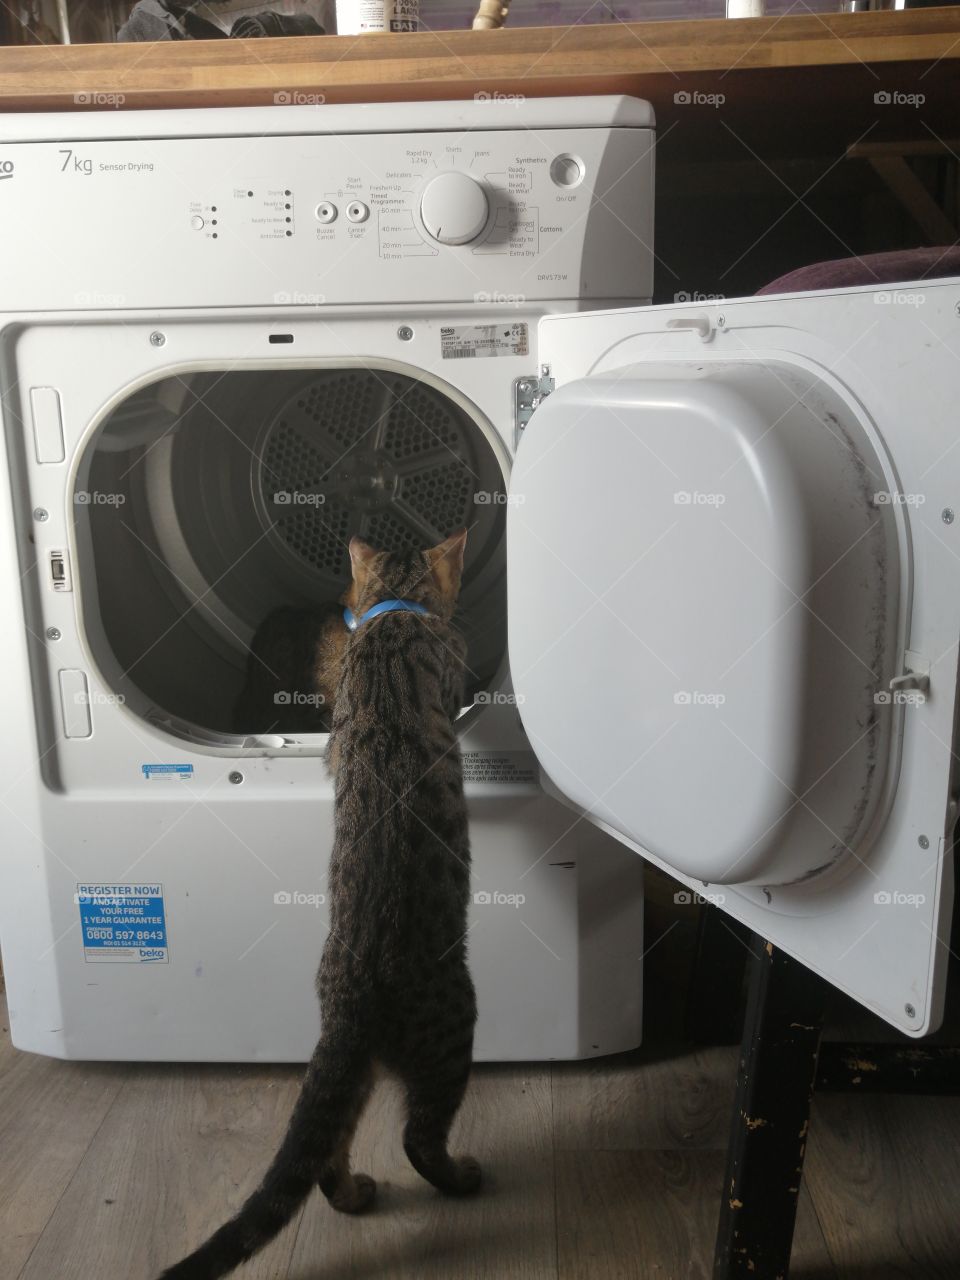 One small step for a kitten.... Kitten explores a tumble dryer